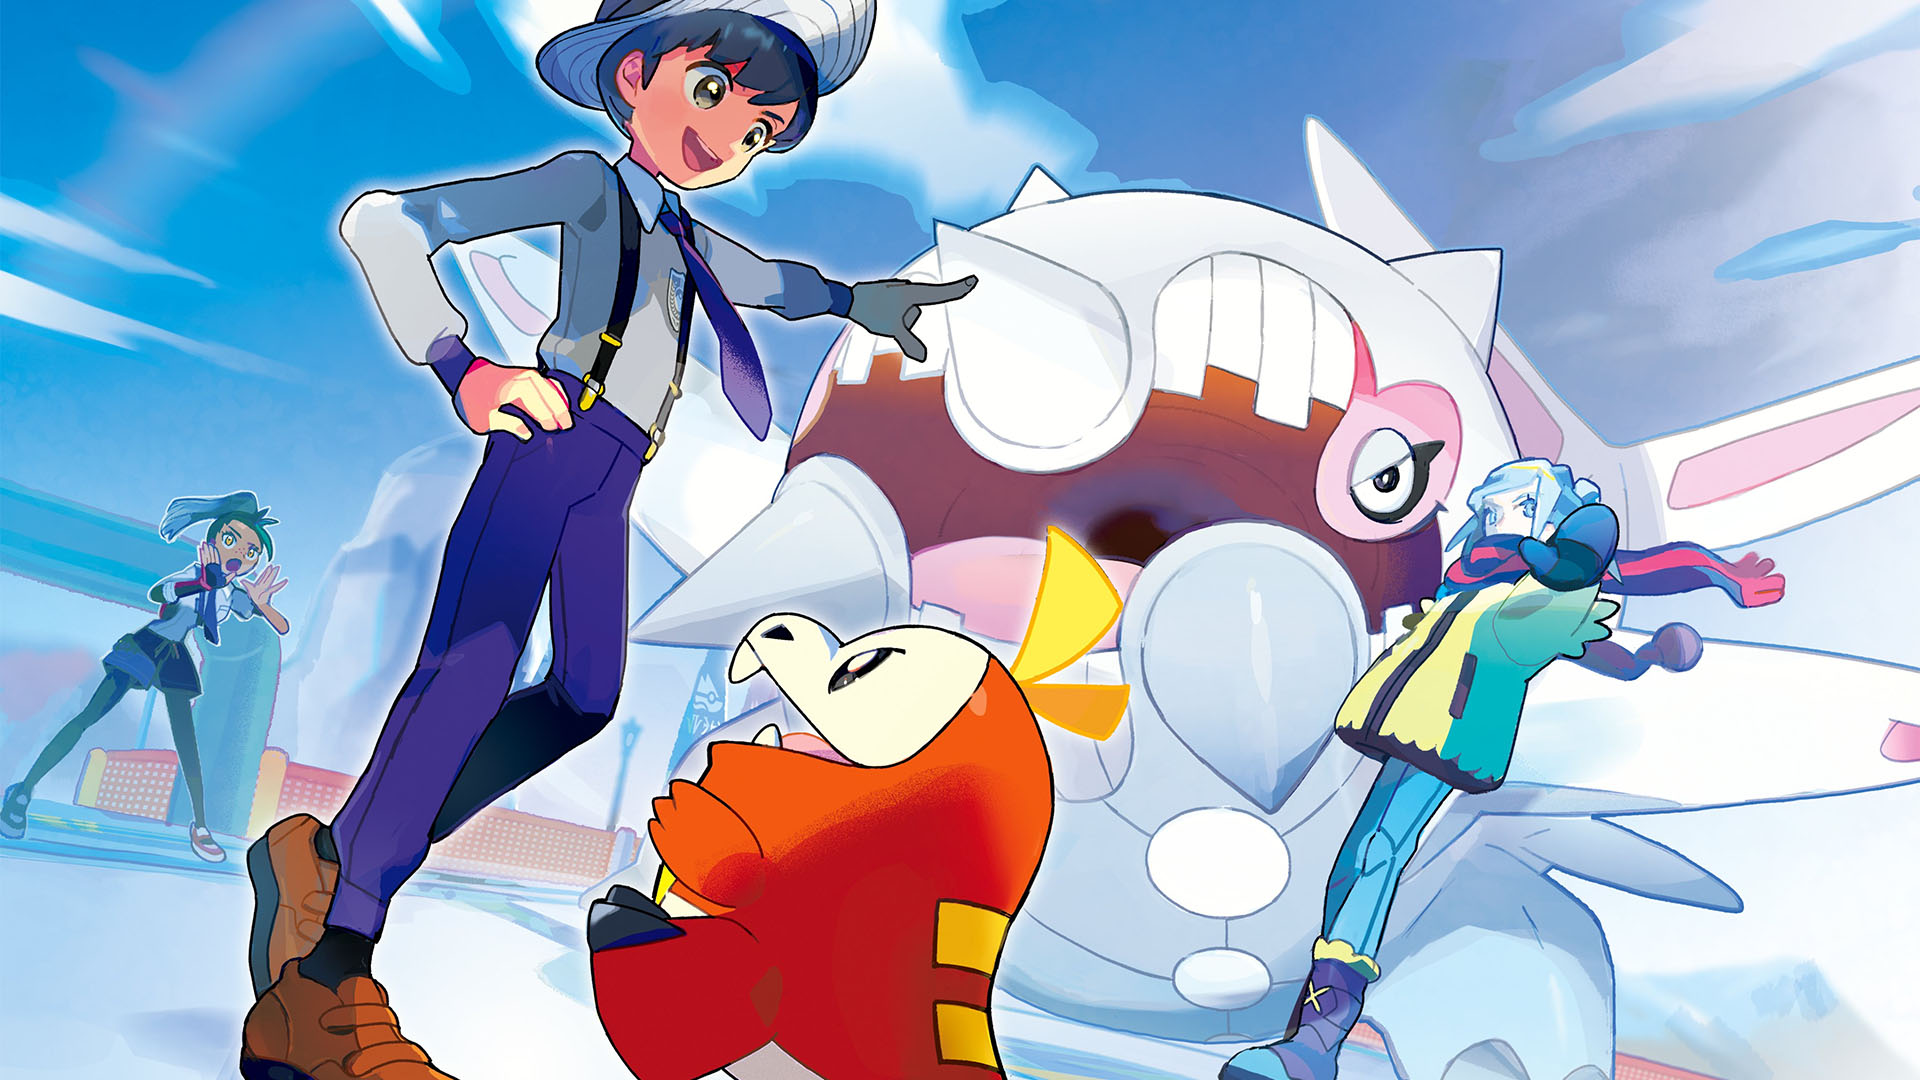 Pokemon Scarlet and Violet sell over 20.61 million copies